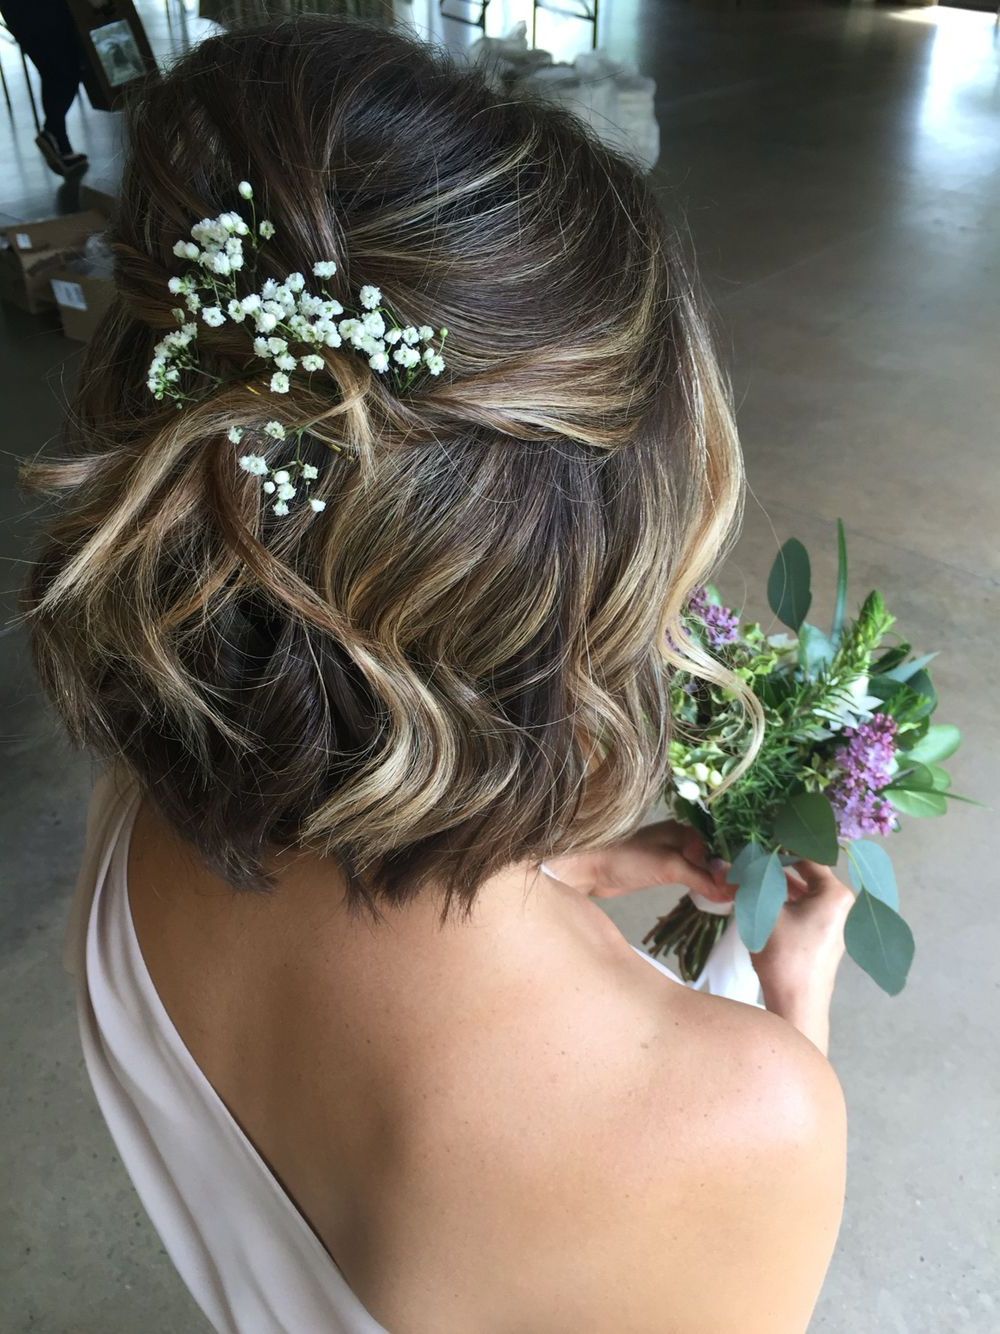 Pinlyss Laurens On Short Hairstyles | Pinterest | Wedding Regarding Bridal Hairstyles Short Hair (View 3 of 25)